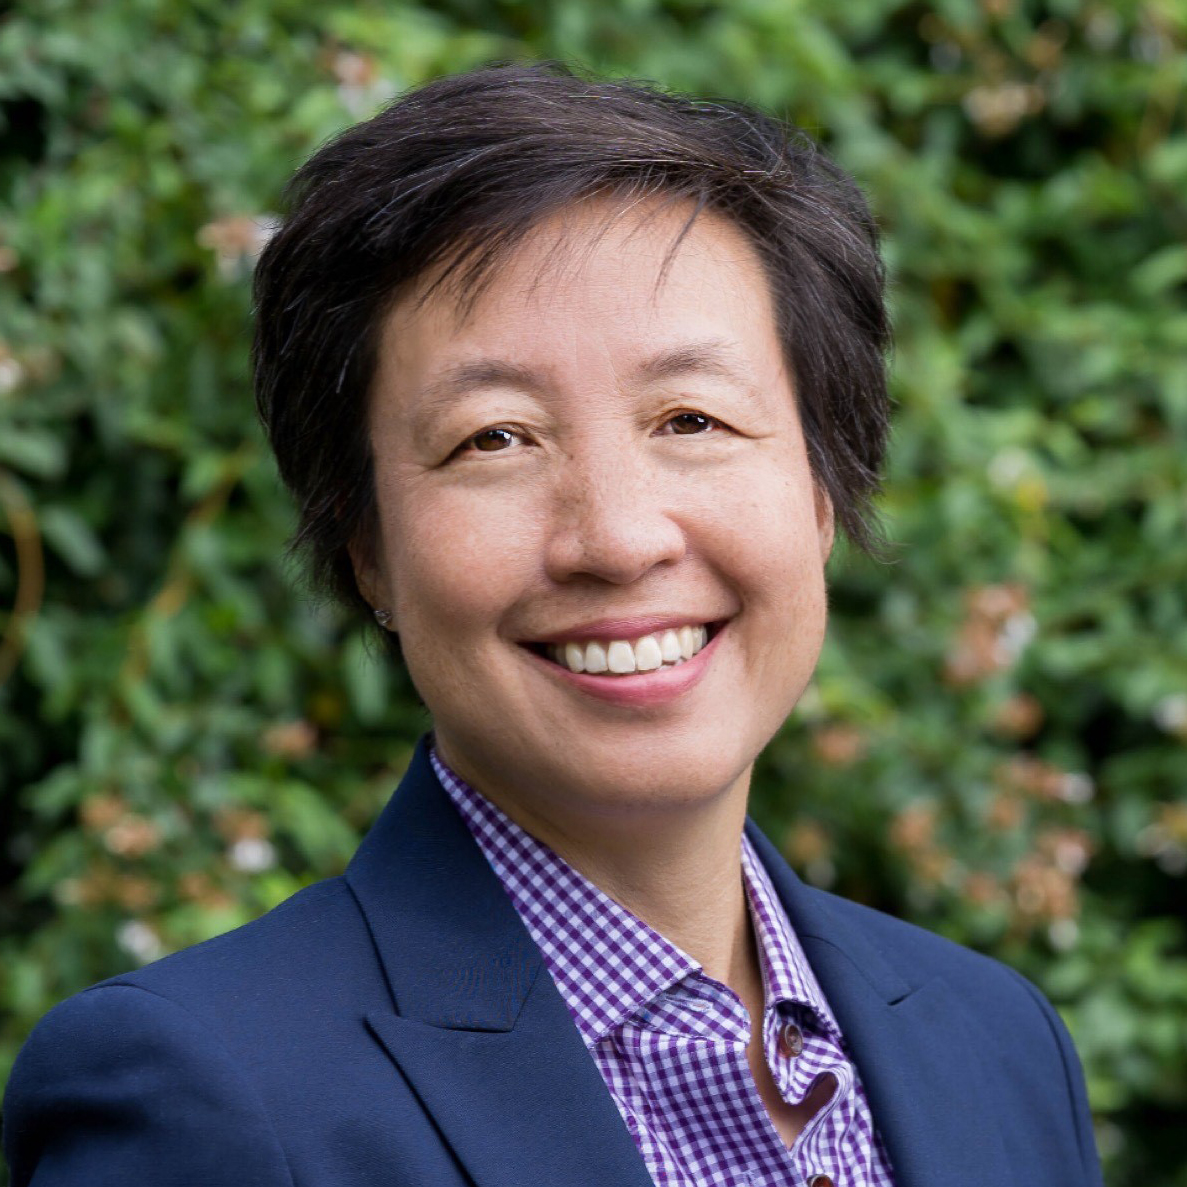 Corvias announced the hire of Lynn Chia as Executive Vice President of New Business Growth.